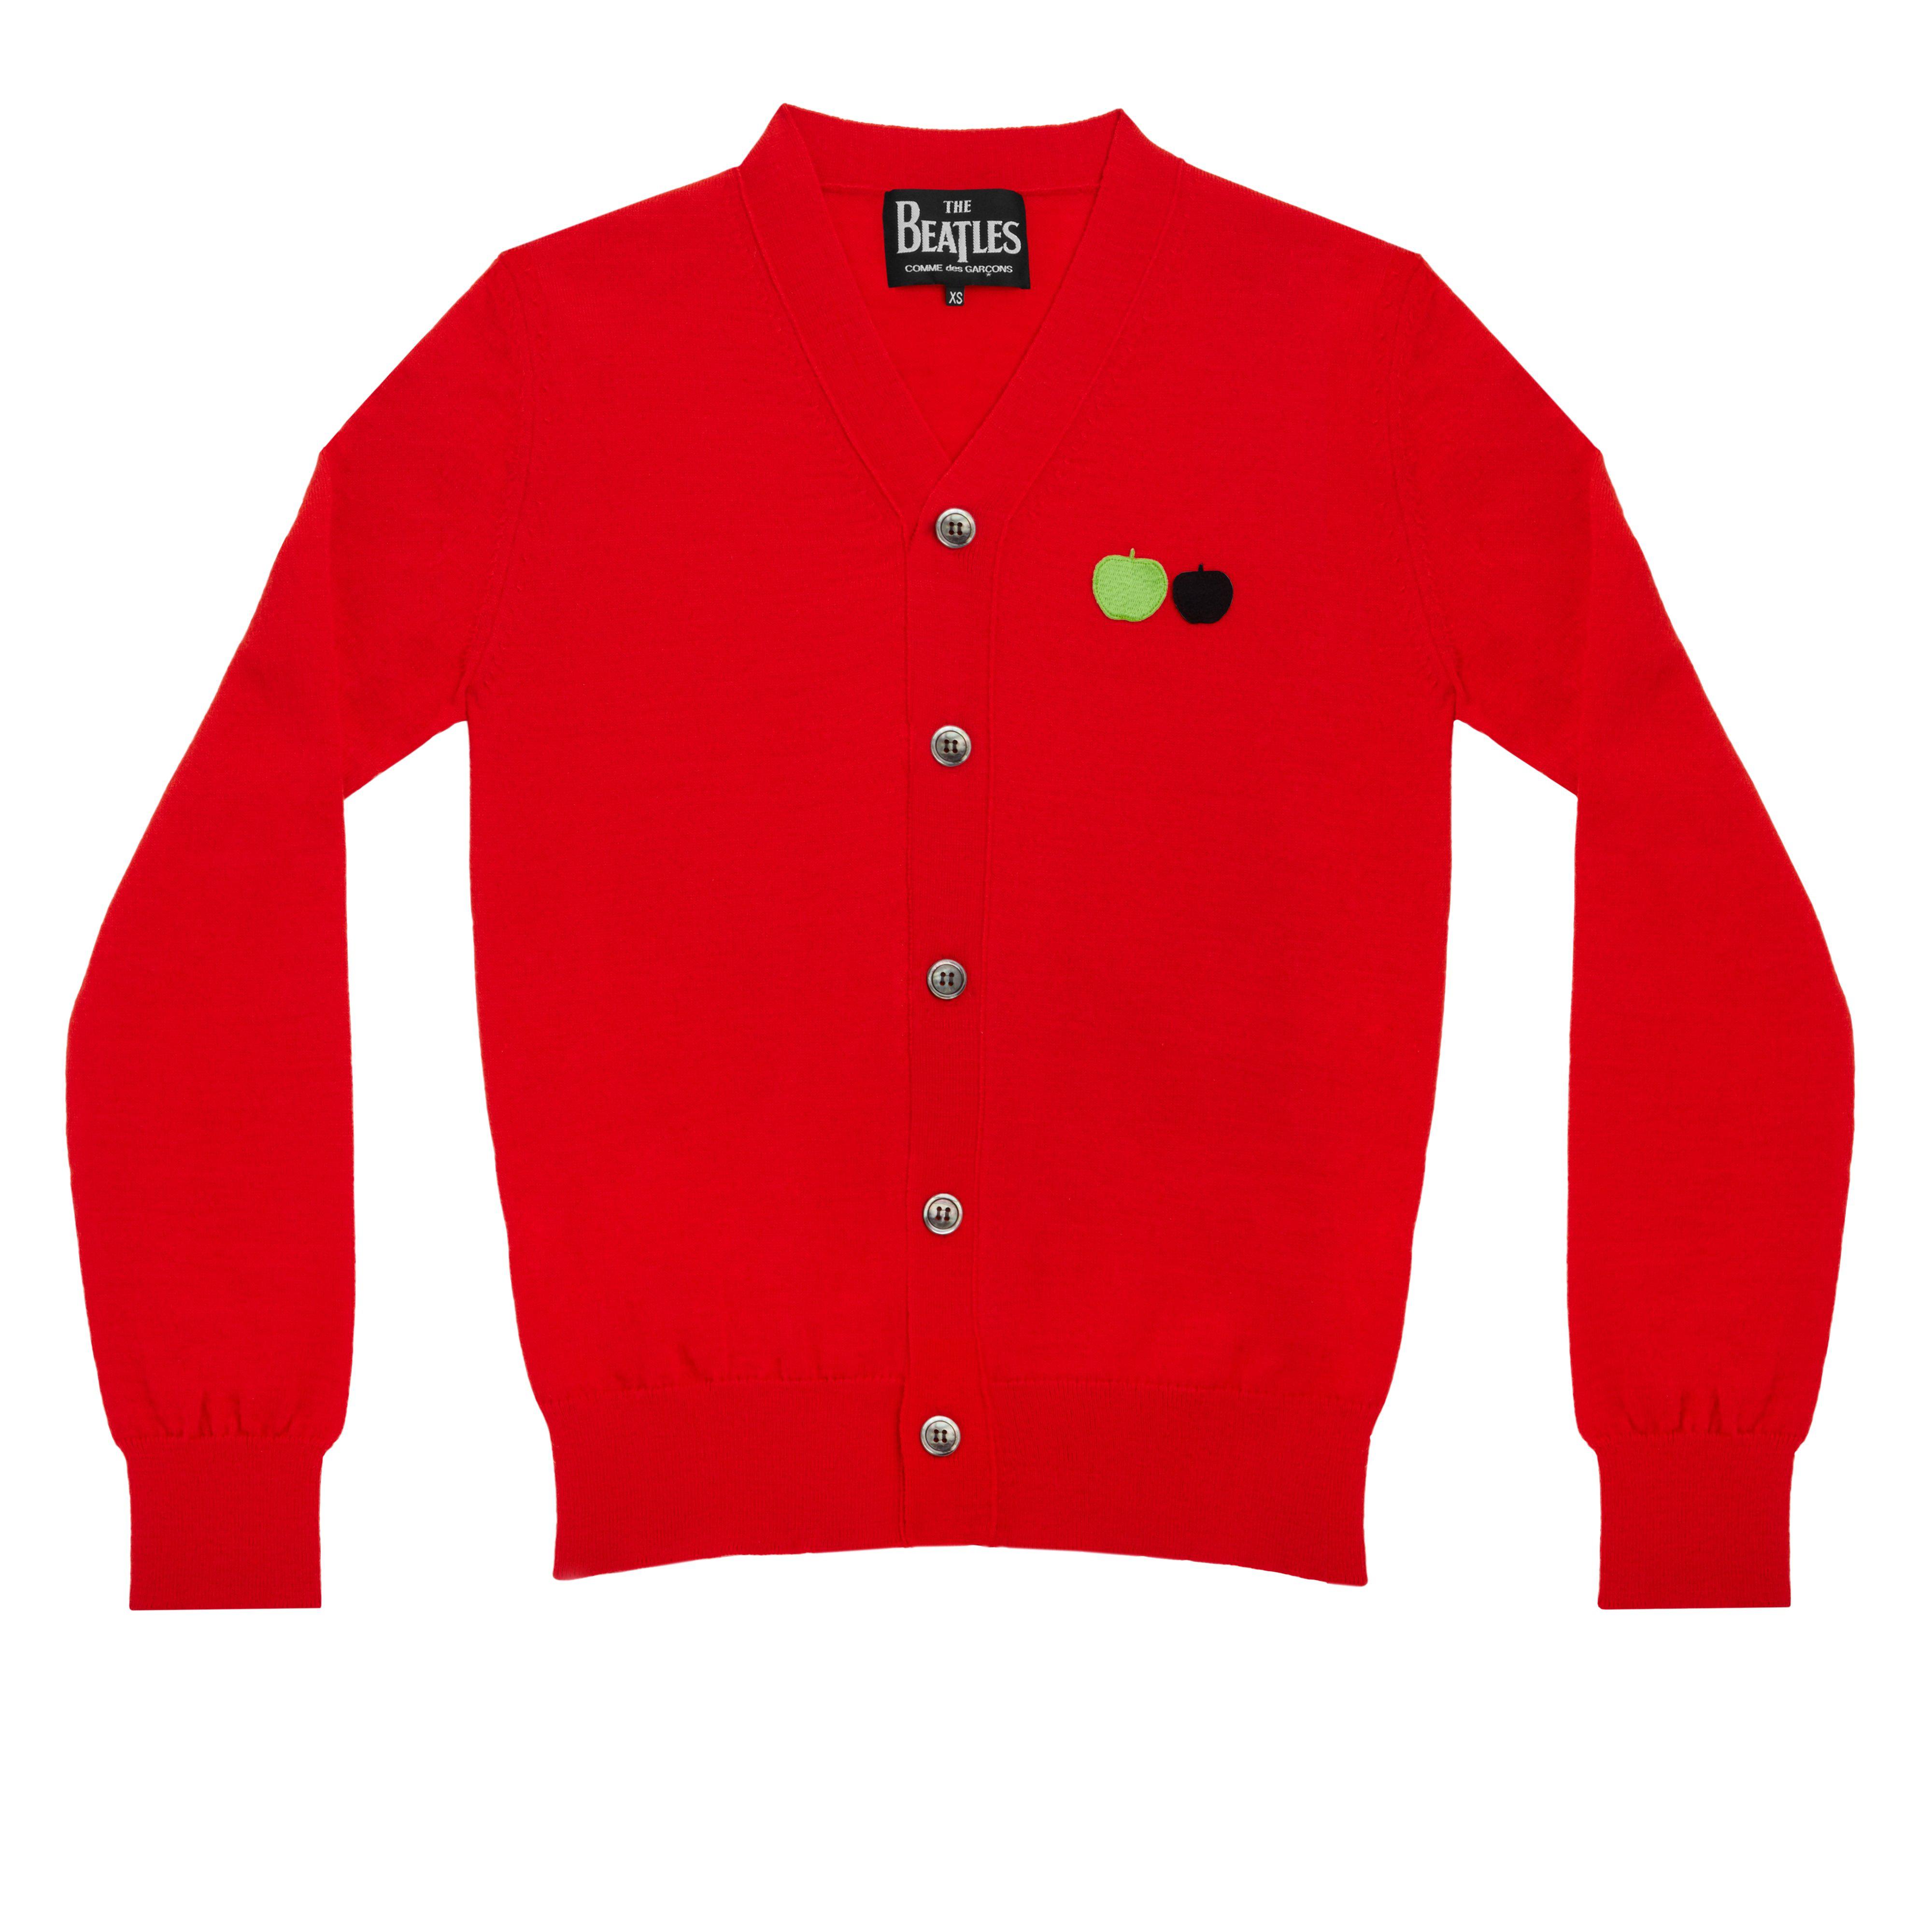 CDG x The Beatles Unisex Cardgian (Red) by COMME DES GARCONS X BEATLES